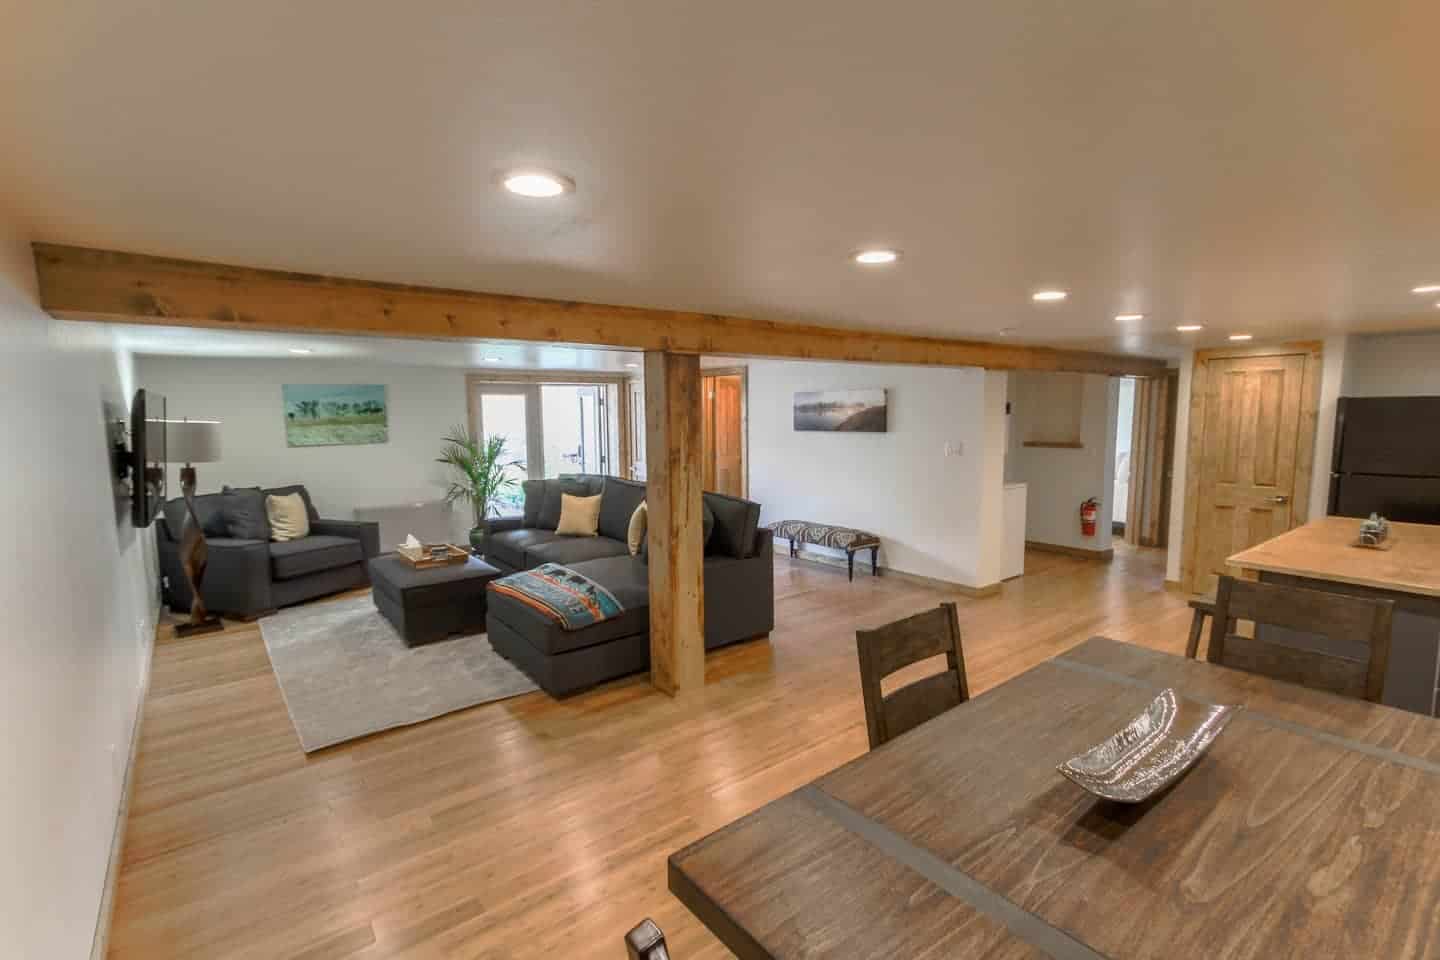 Image of Airbnb rental in Yellowstone, Wyoming